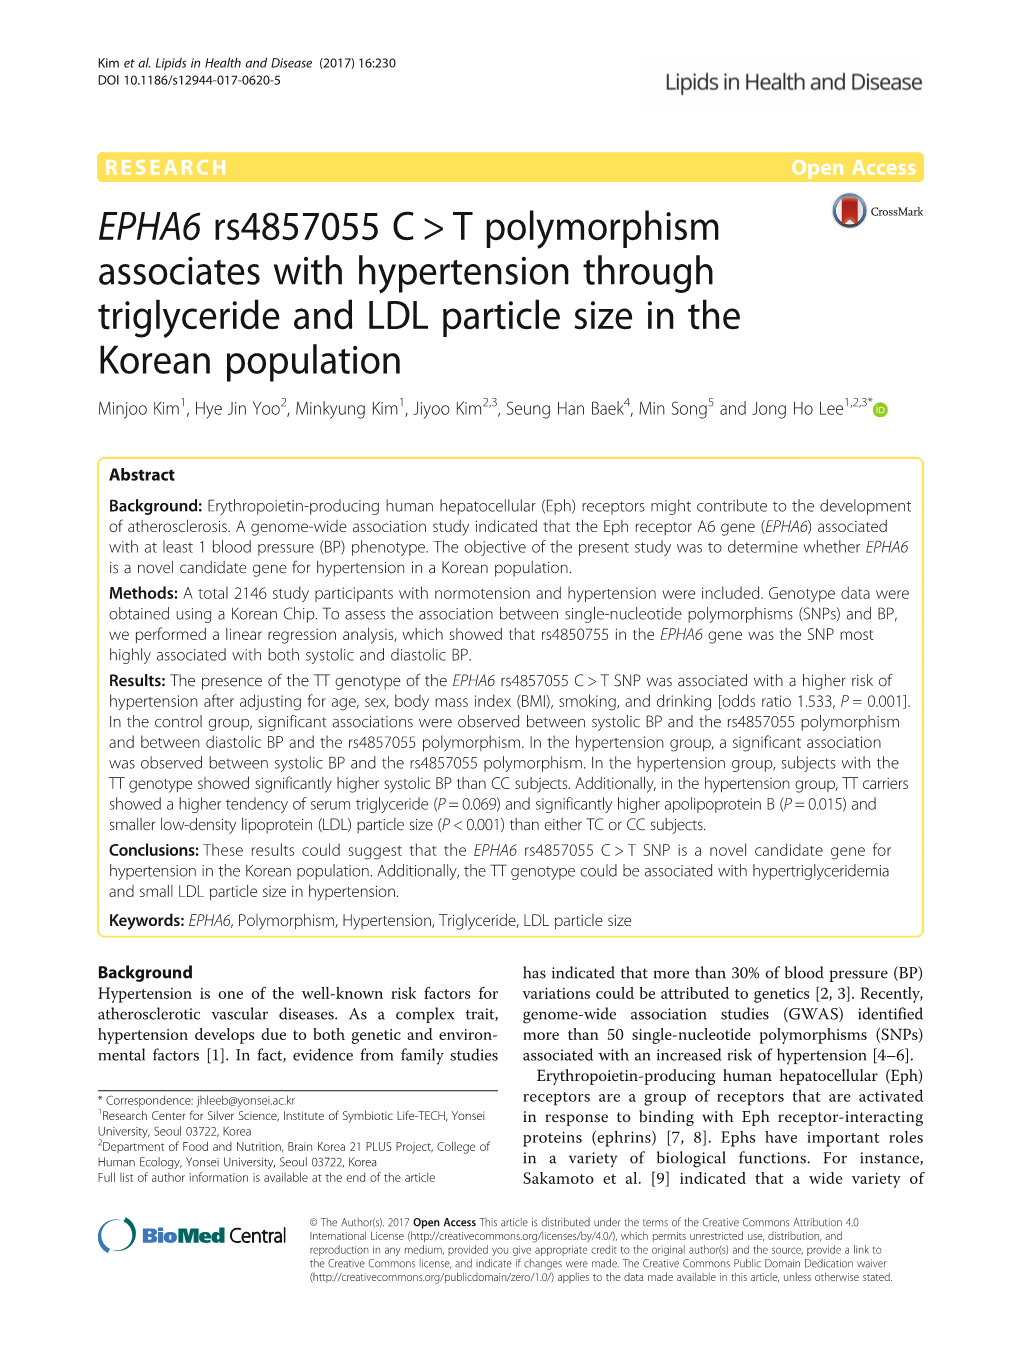 EPHA6 Rs4857055 C &gt; T Polymorphism Associates With